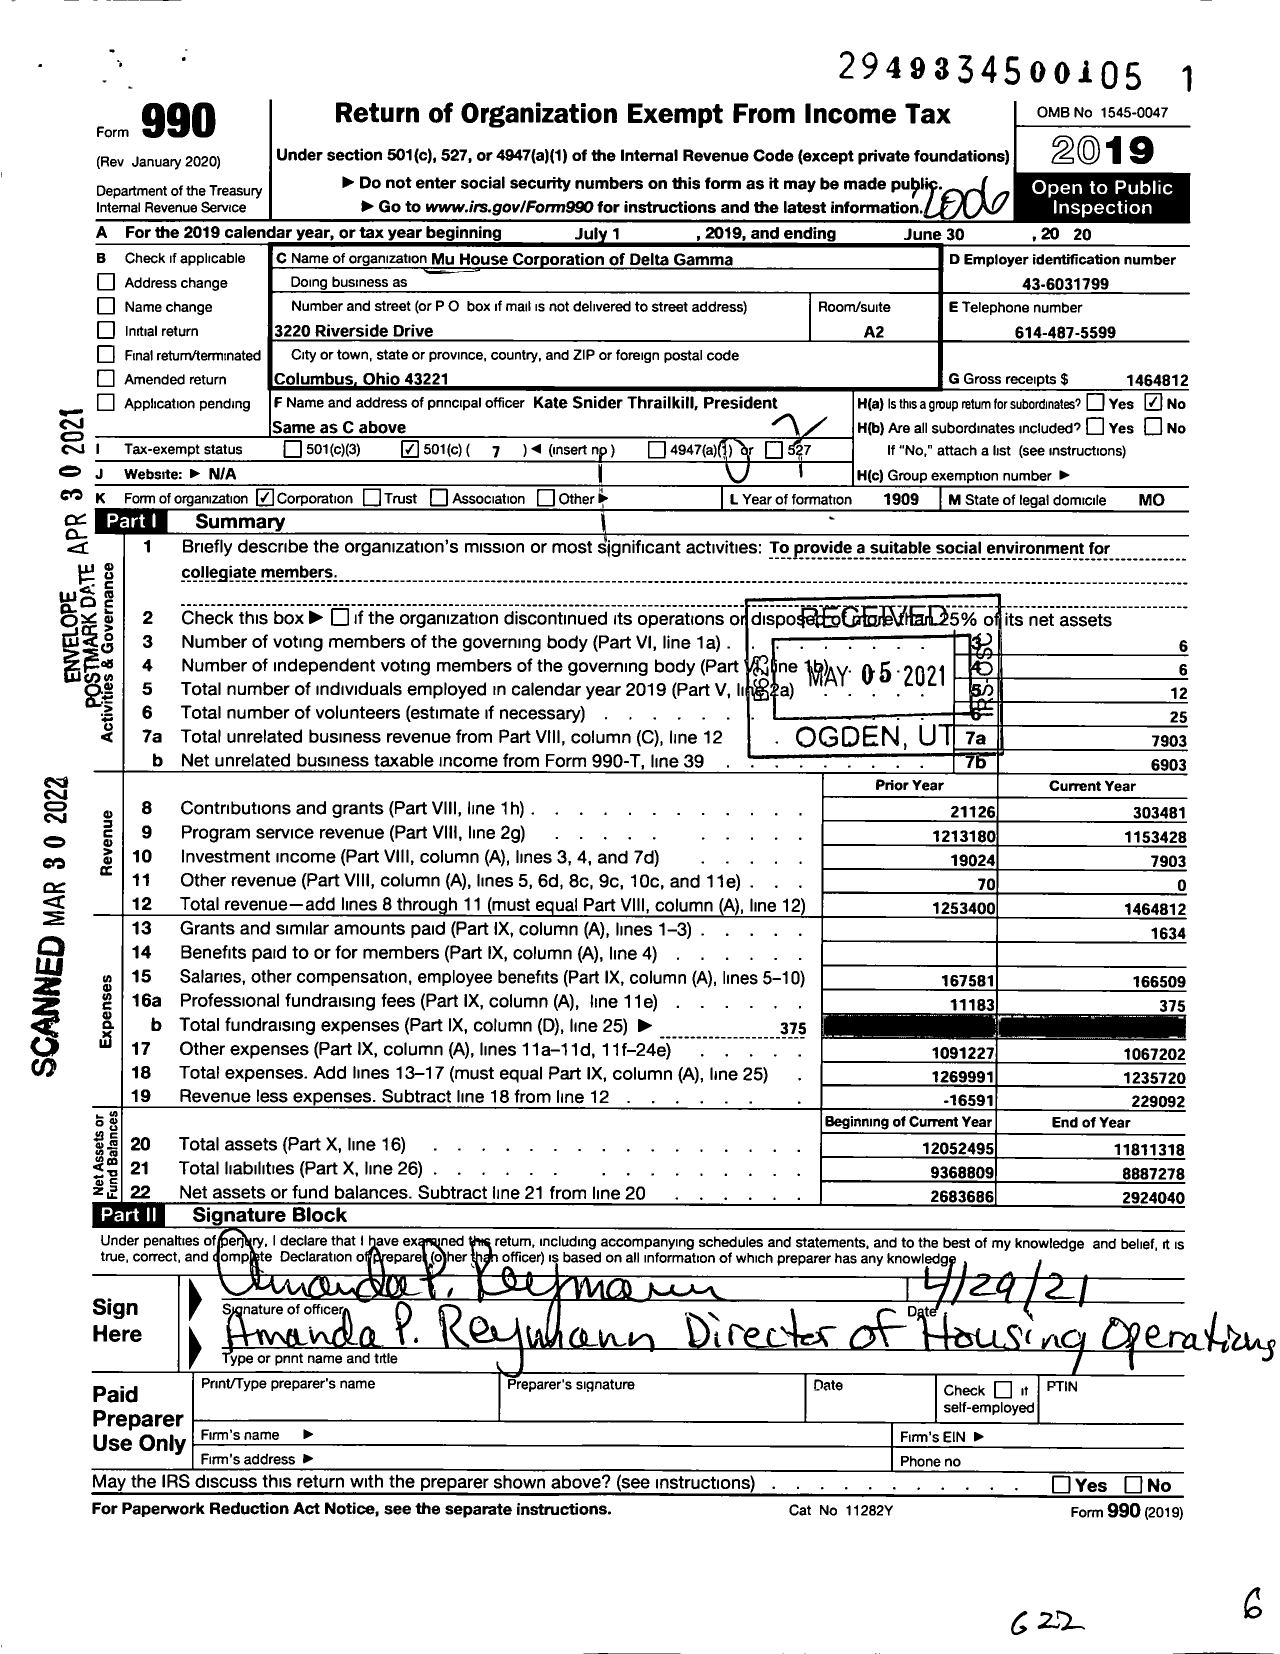 Image of first page of 2019 Form 990O for Mu House Corporation of Delta Gamma